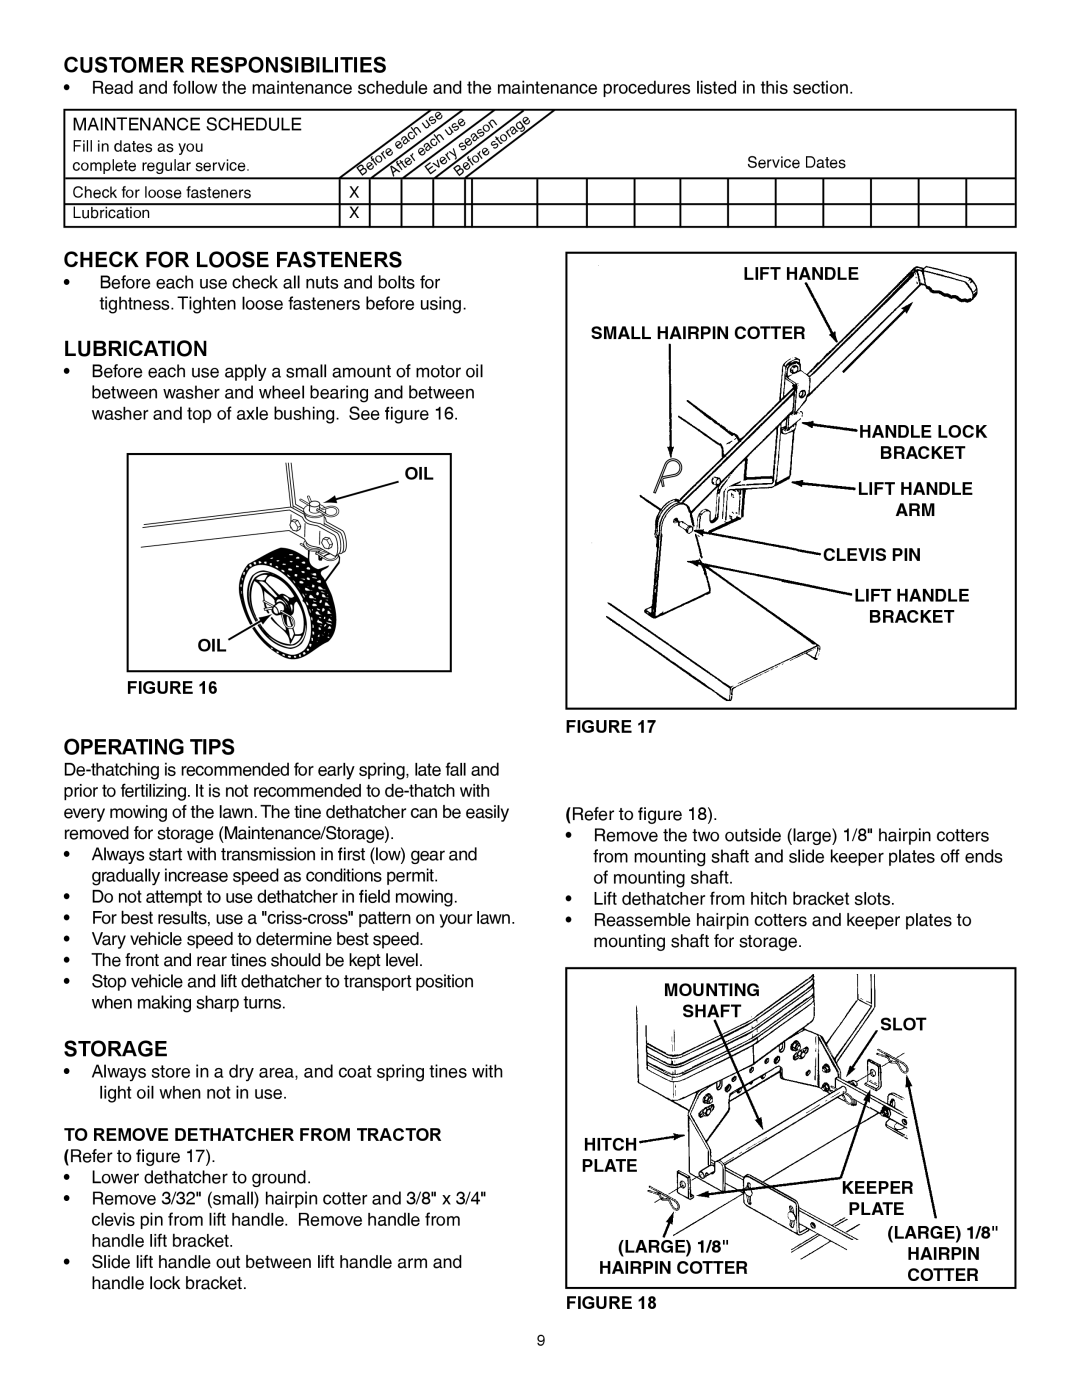 Agri-Fab 45-0438 manual Customer Responsibilities, Check For Loose Fasteners, Lubrication, Operating Tips, Storage, Figure 